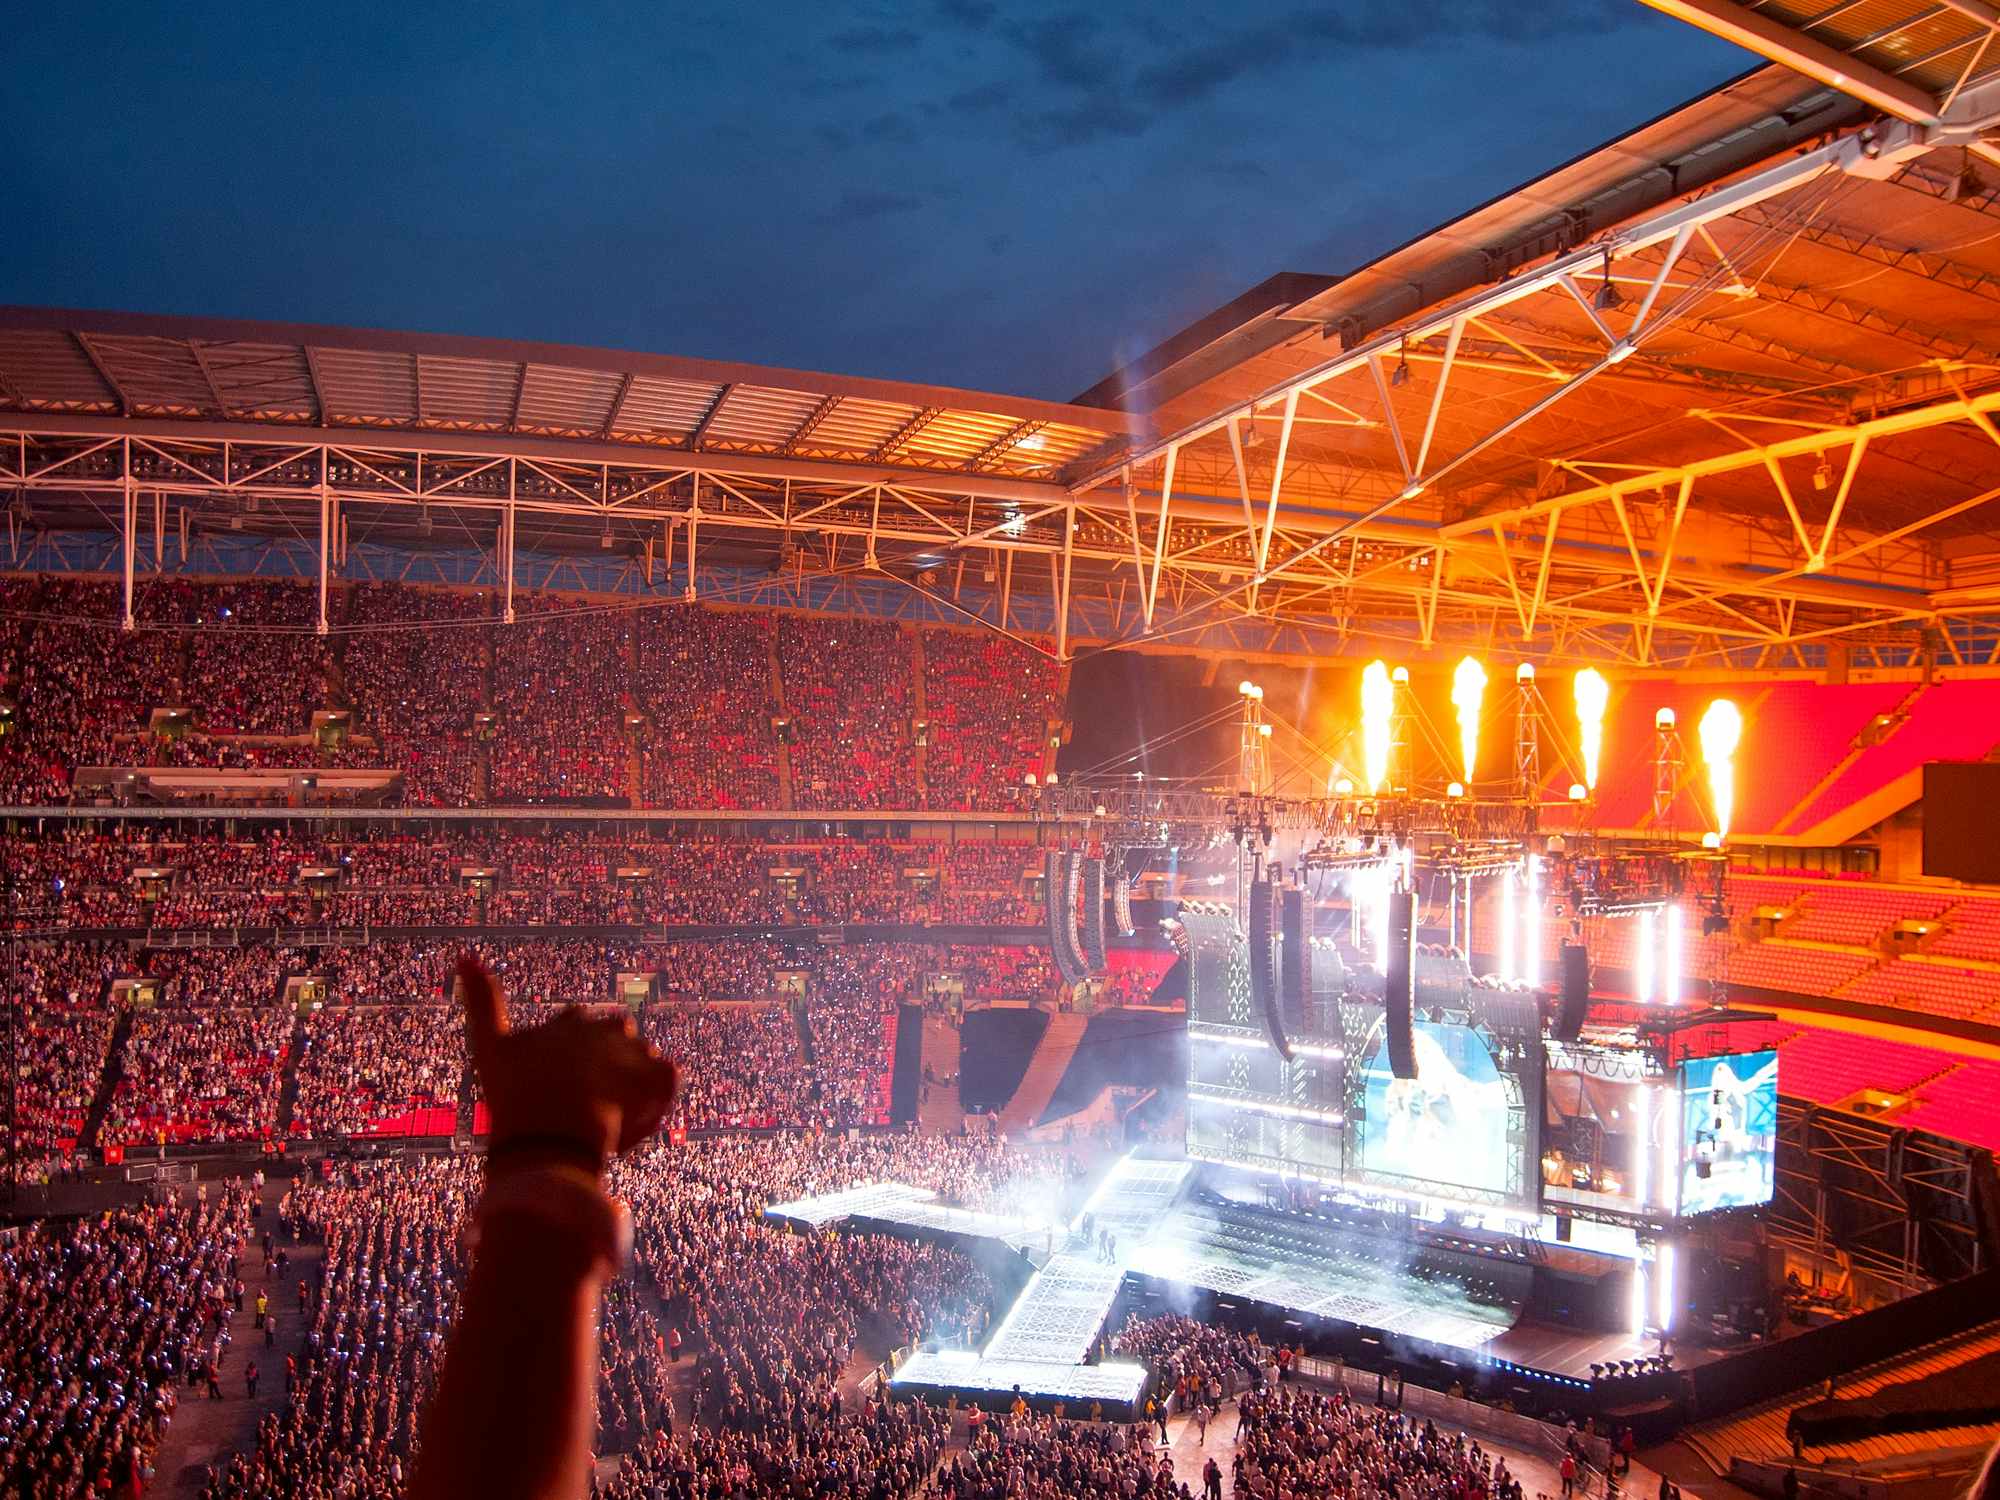 taylor swift performing on stage at a stadium with large crowd